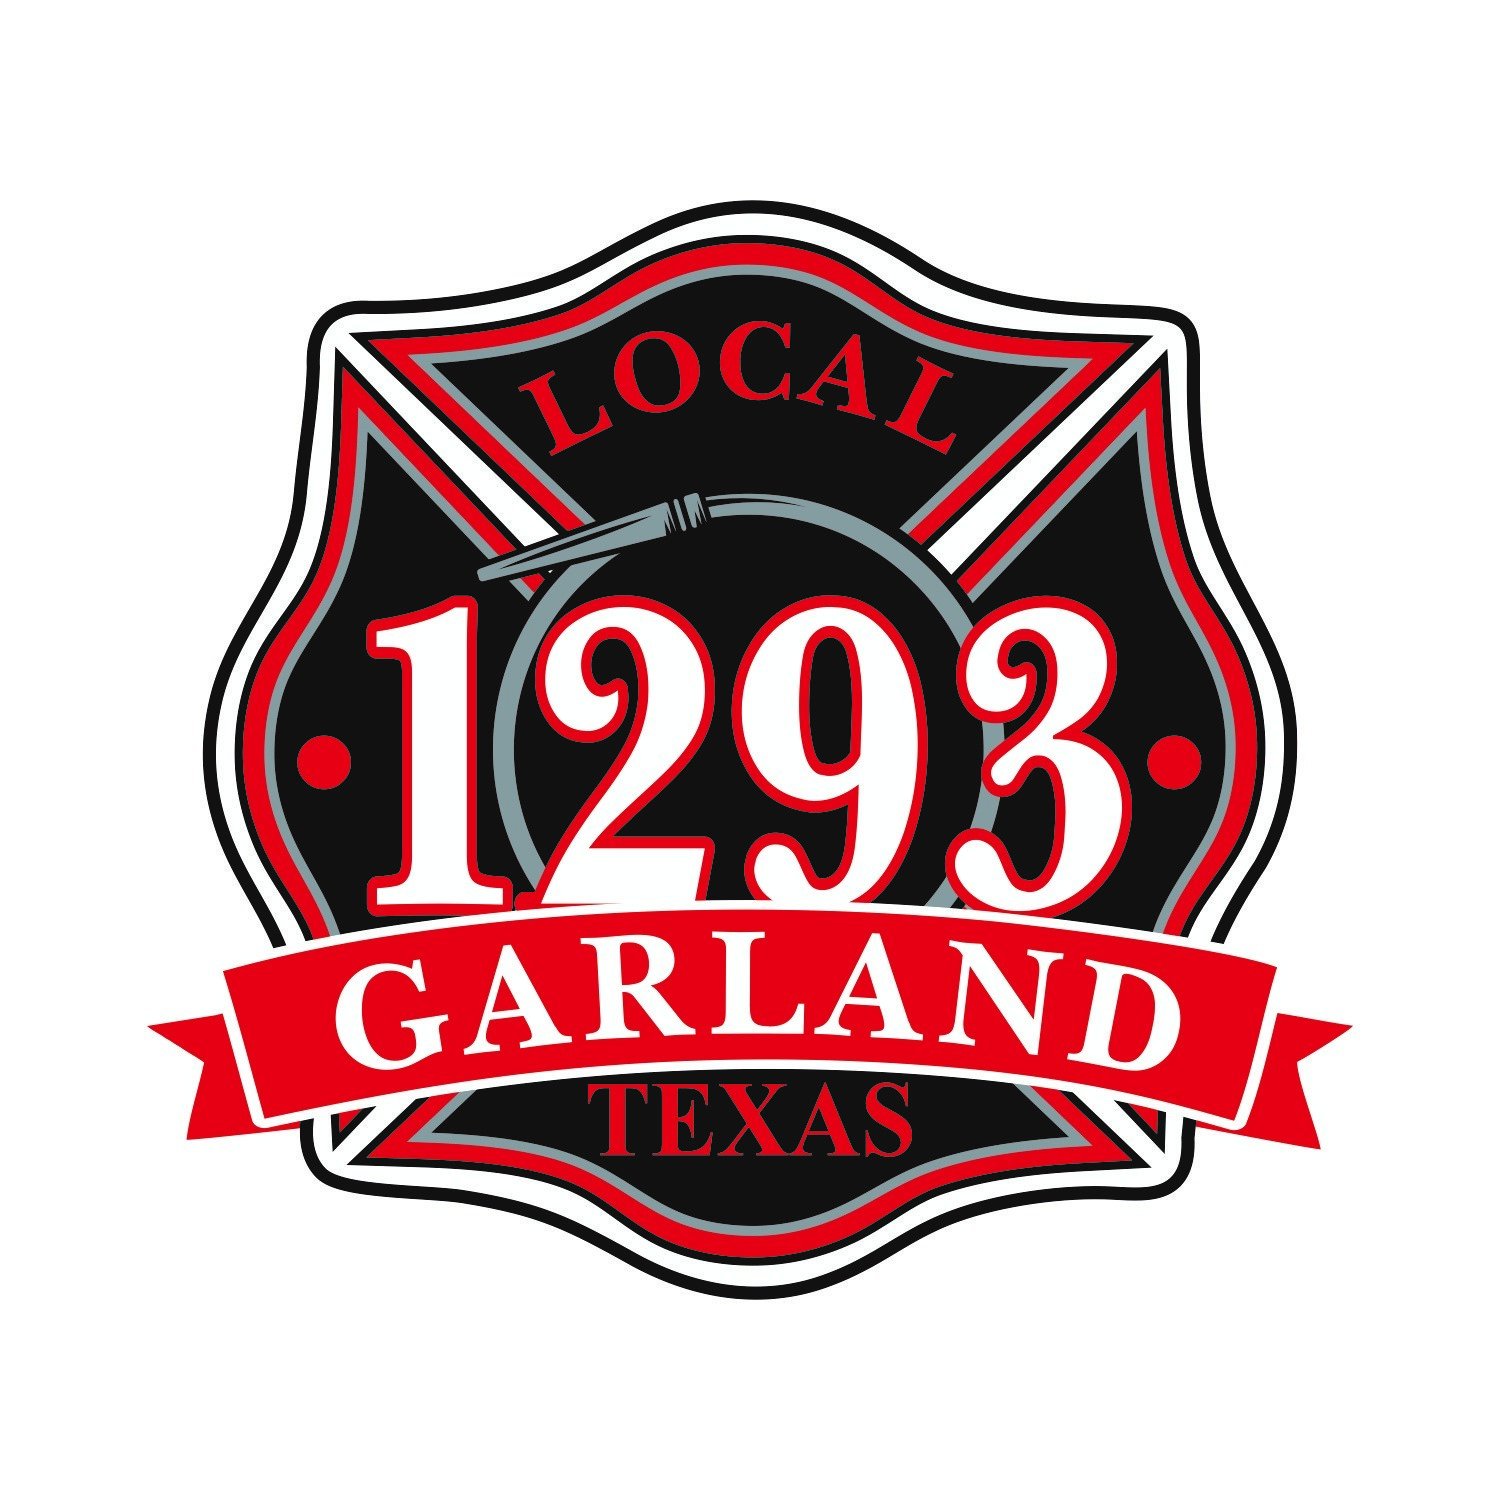 Official Twitter feed for the Garland Firefighters Association Local 1293